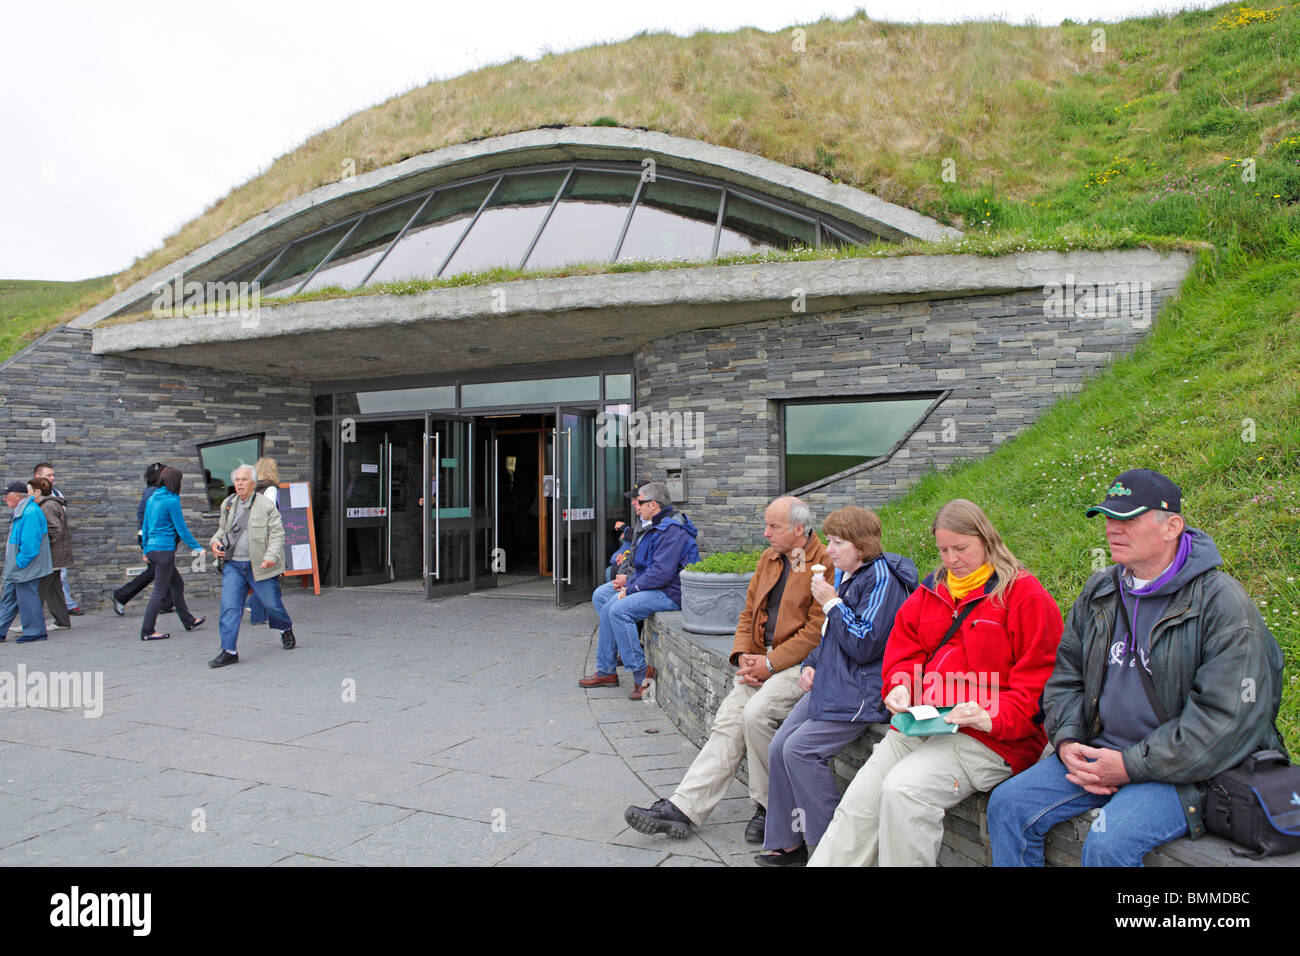 entrance to the visitor centre, Cliffs of Moher, Co. Clare, Republic of Ireland Stock Photo